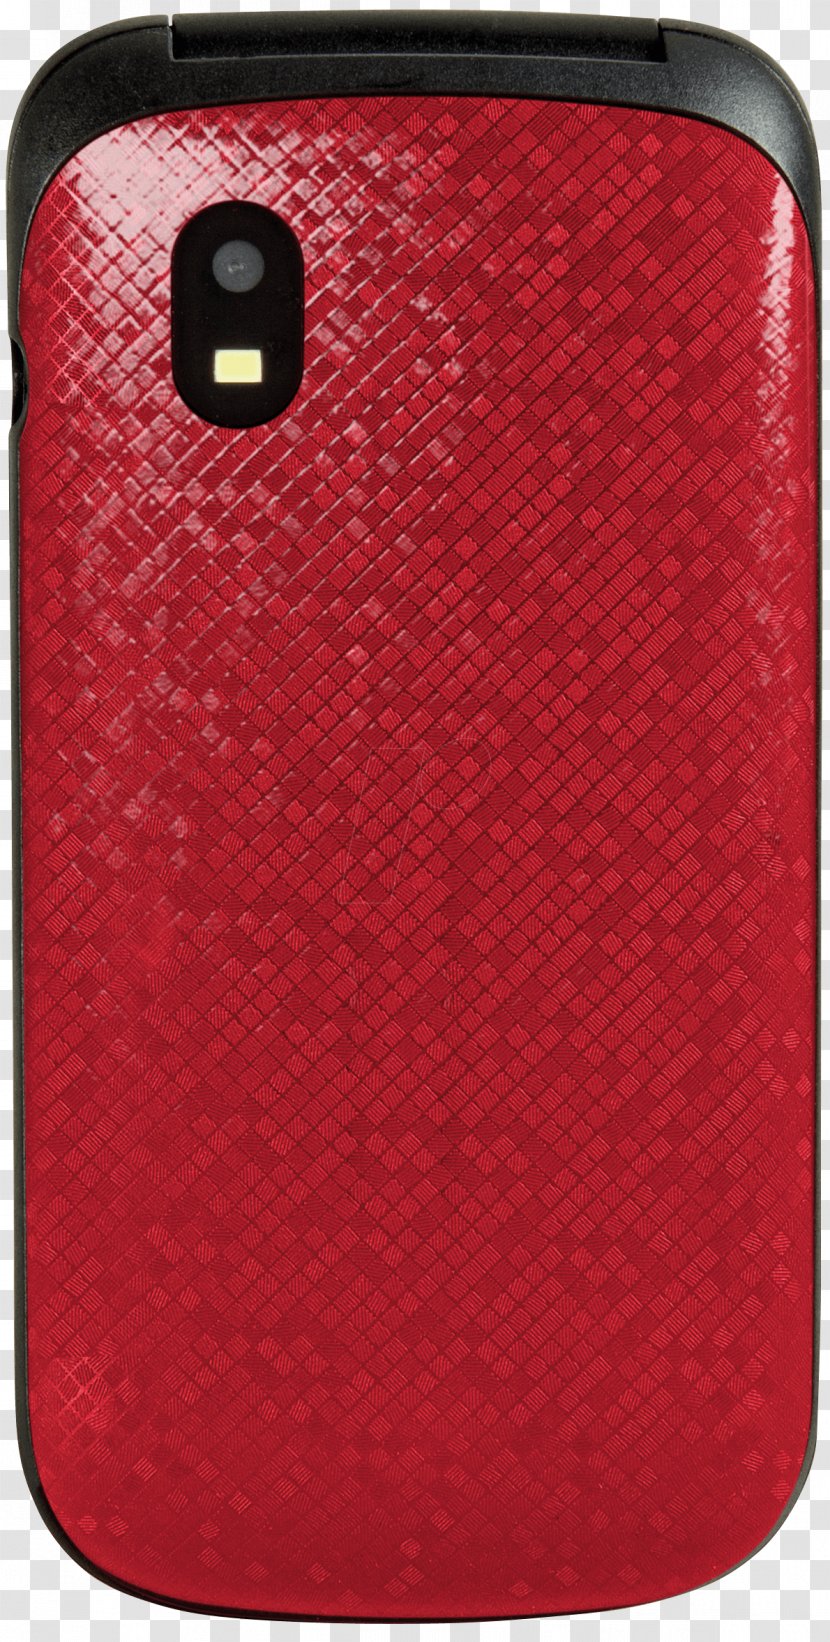 Rot Mobile Phone Accessories Swisstone SC 330 Flip Top - Computer Network - Tone Transparent PNG